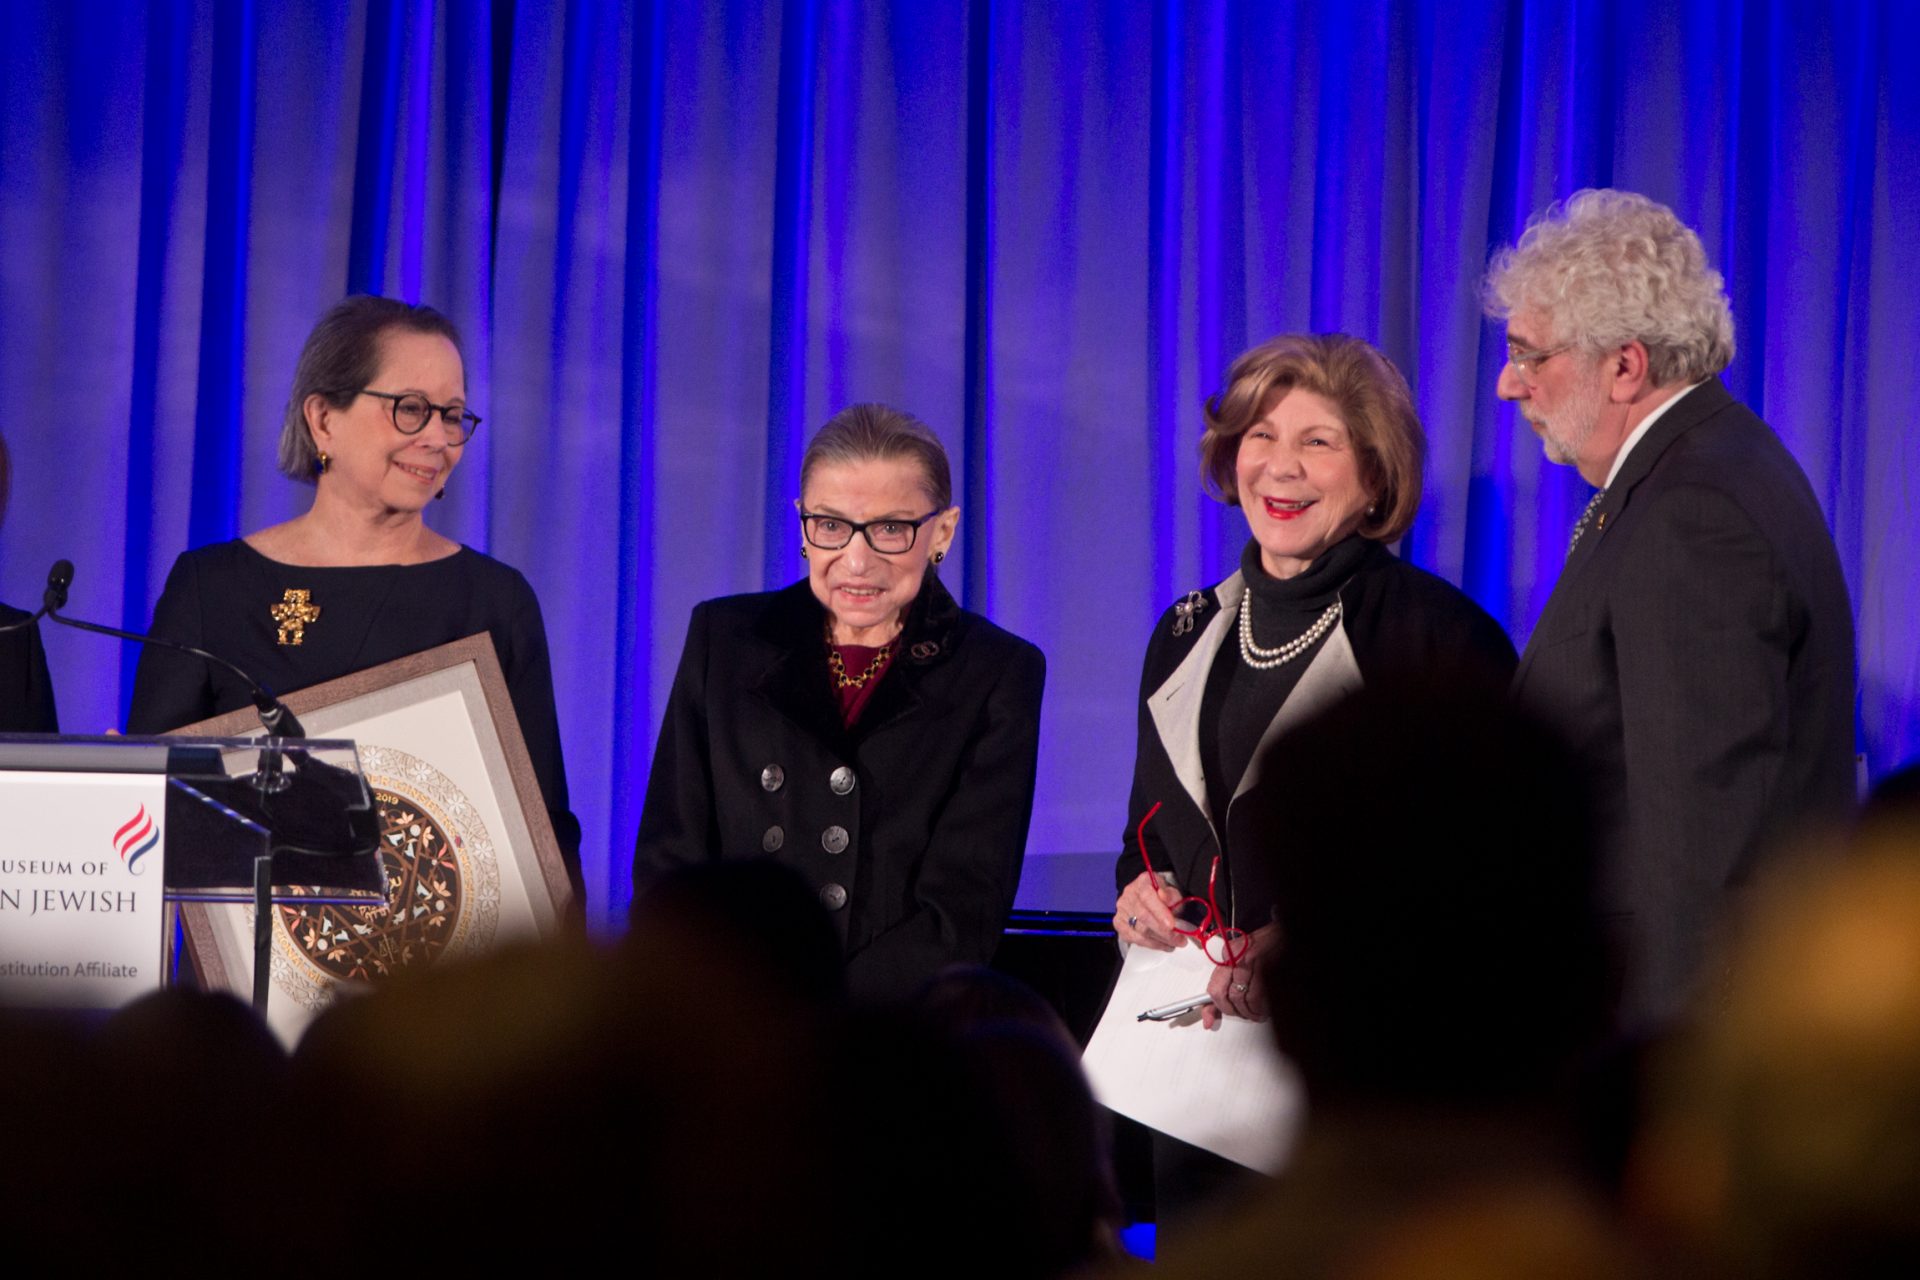 Supreme Court Justice Ruth Bader Ginsburg (second from left) on stage with former Pa. State Rep. Constance Williams, (left), NPR Legal Affairs Correspondent Nina Totenbeg, (second from right) and Misha Halperin, Interim CEO of the National Museum of Jewish History.